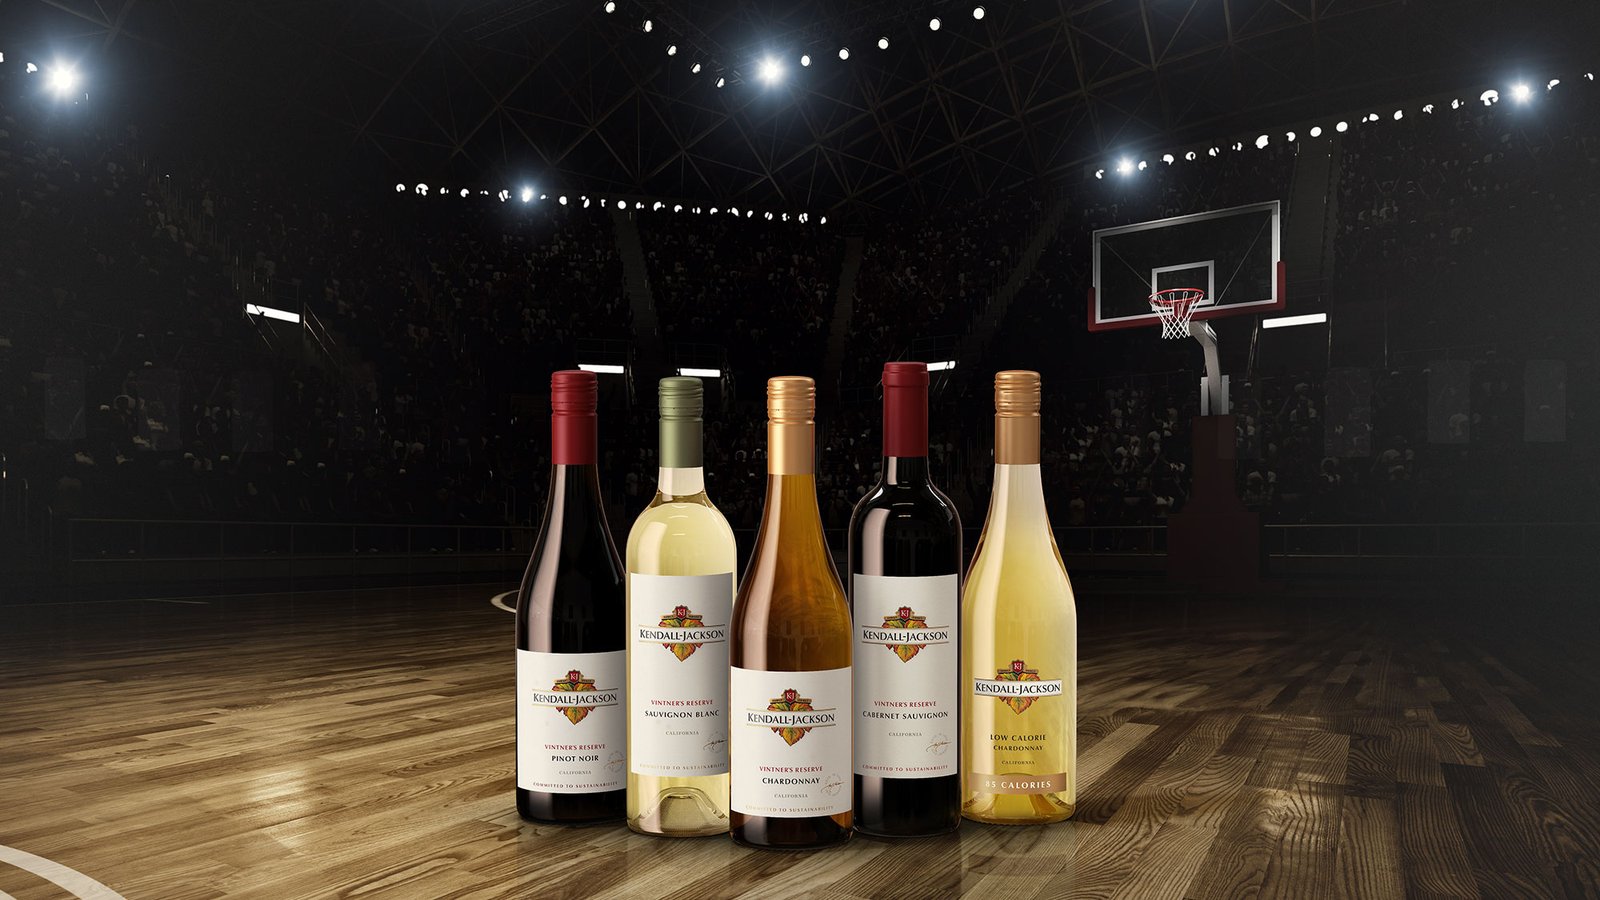 Kendall-Jackson Is the First Official Wine Partner of the NBA